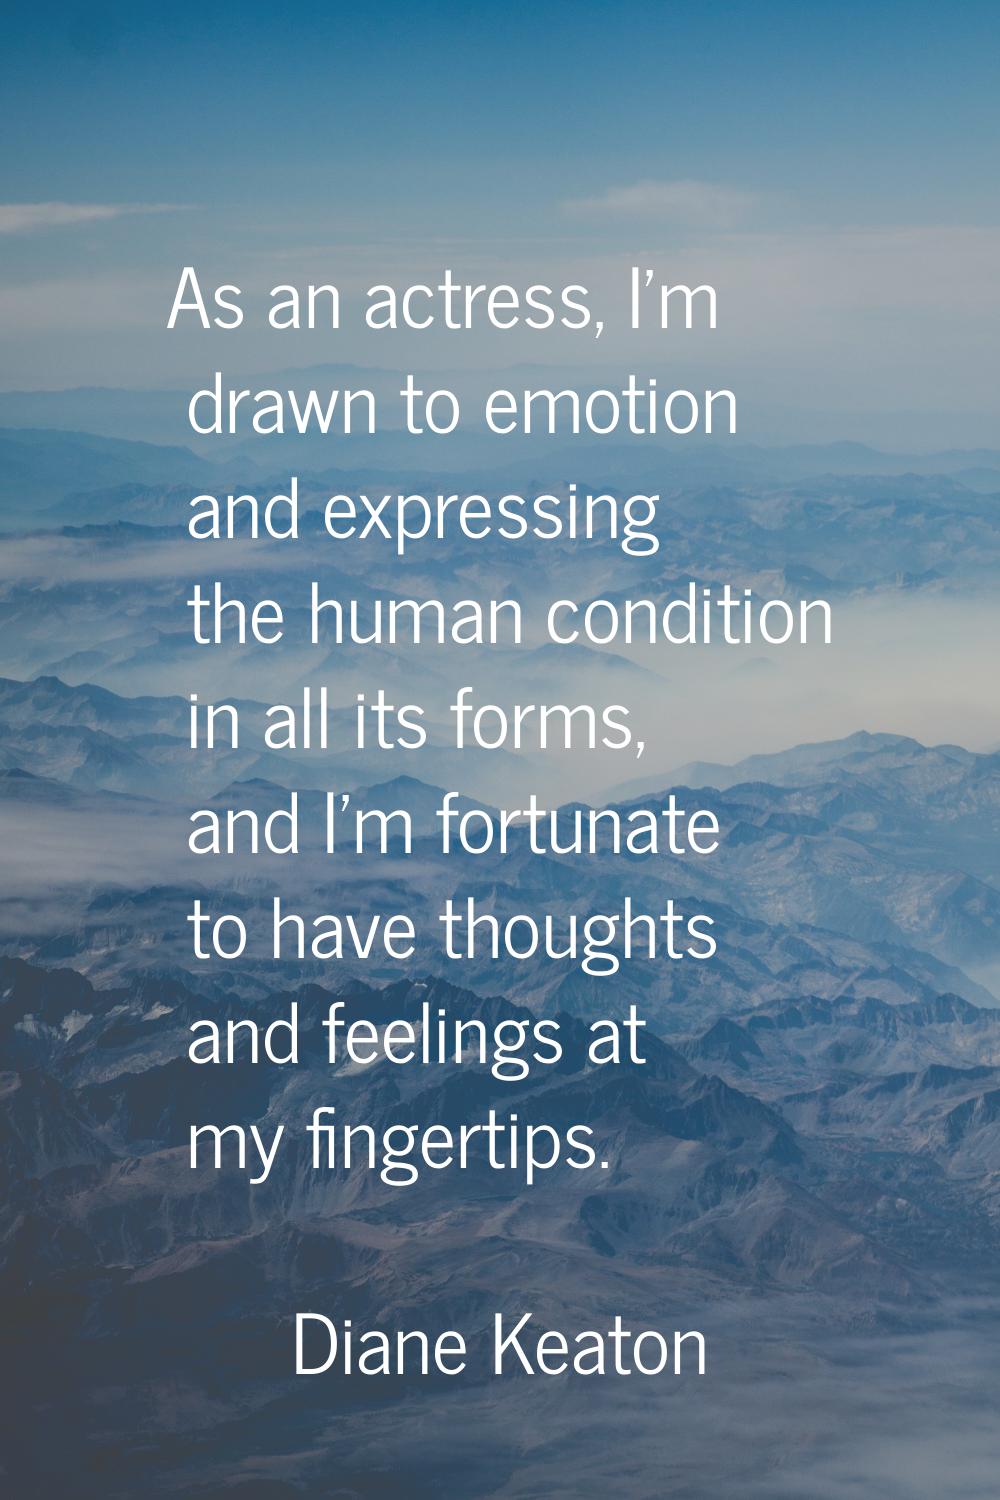 As an actress, I'm drawn to emotion and expressing the human condition in all its forms, and I'm fo